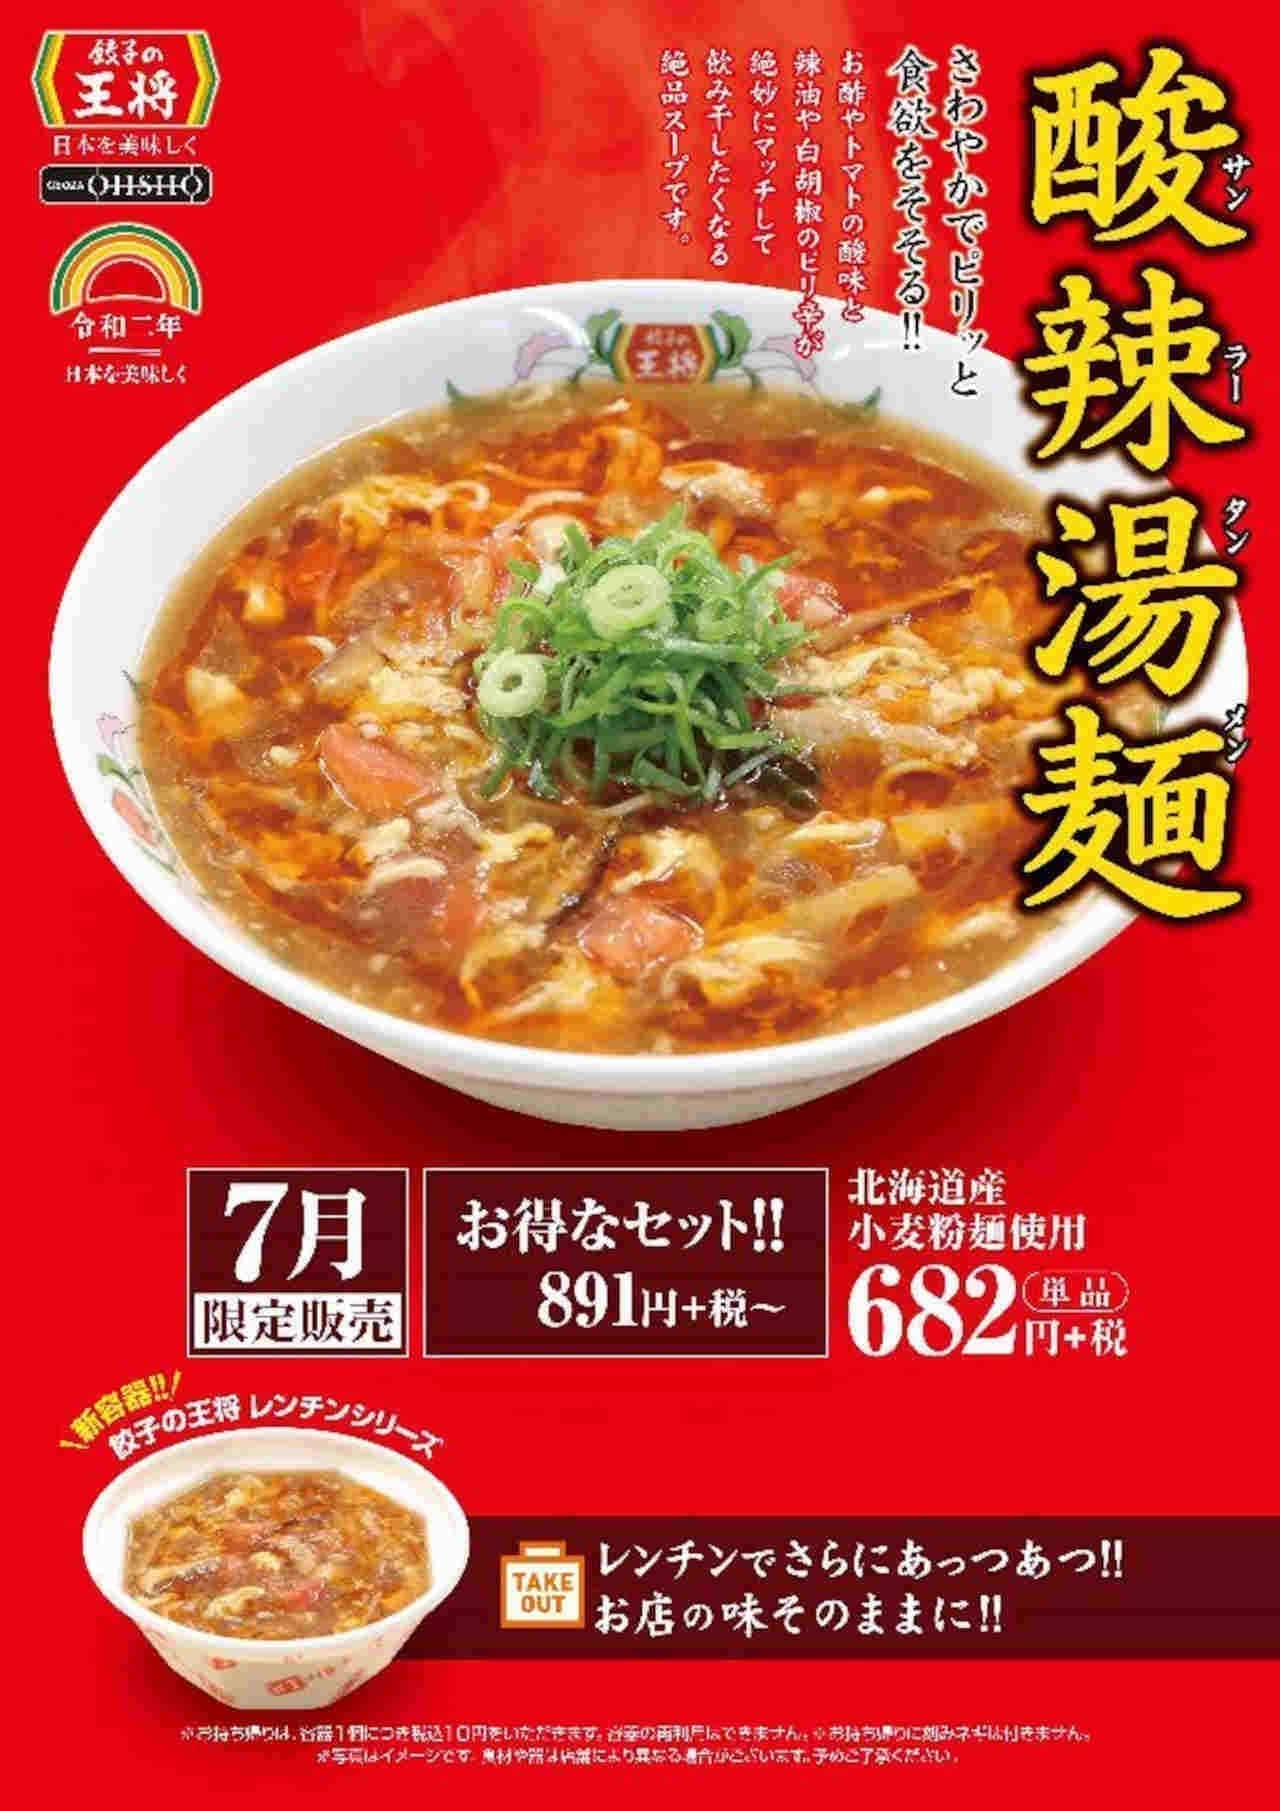 "Hot and sour soup noodles" for a limited time to the Gyoza no Ohsho